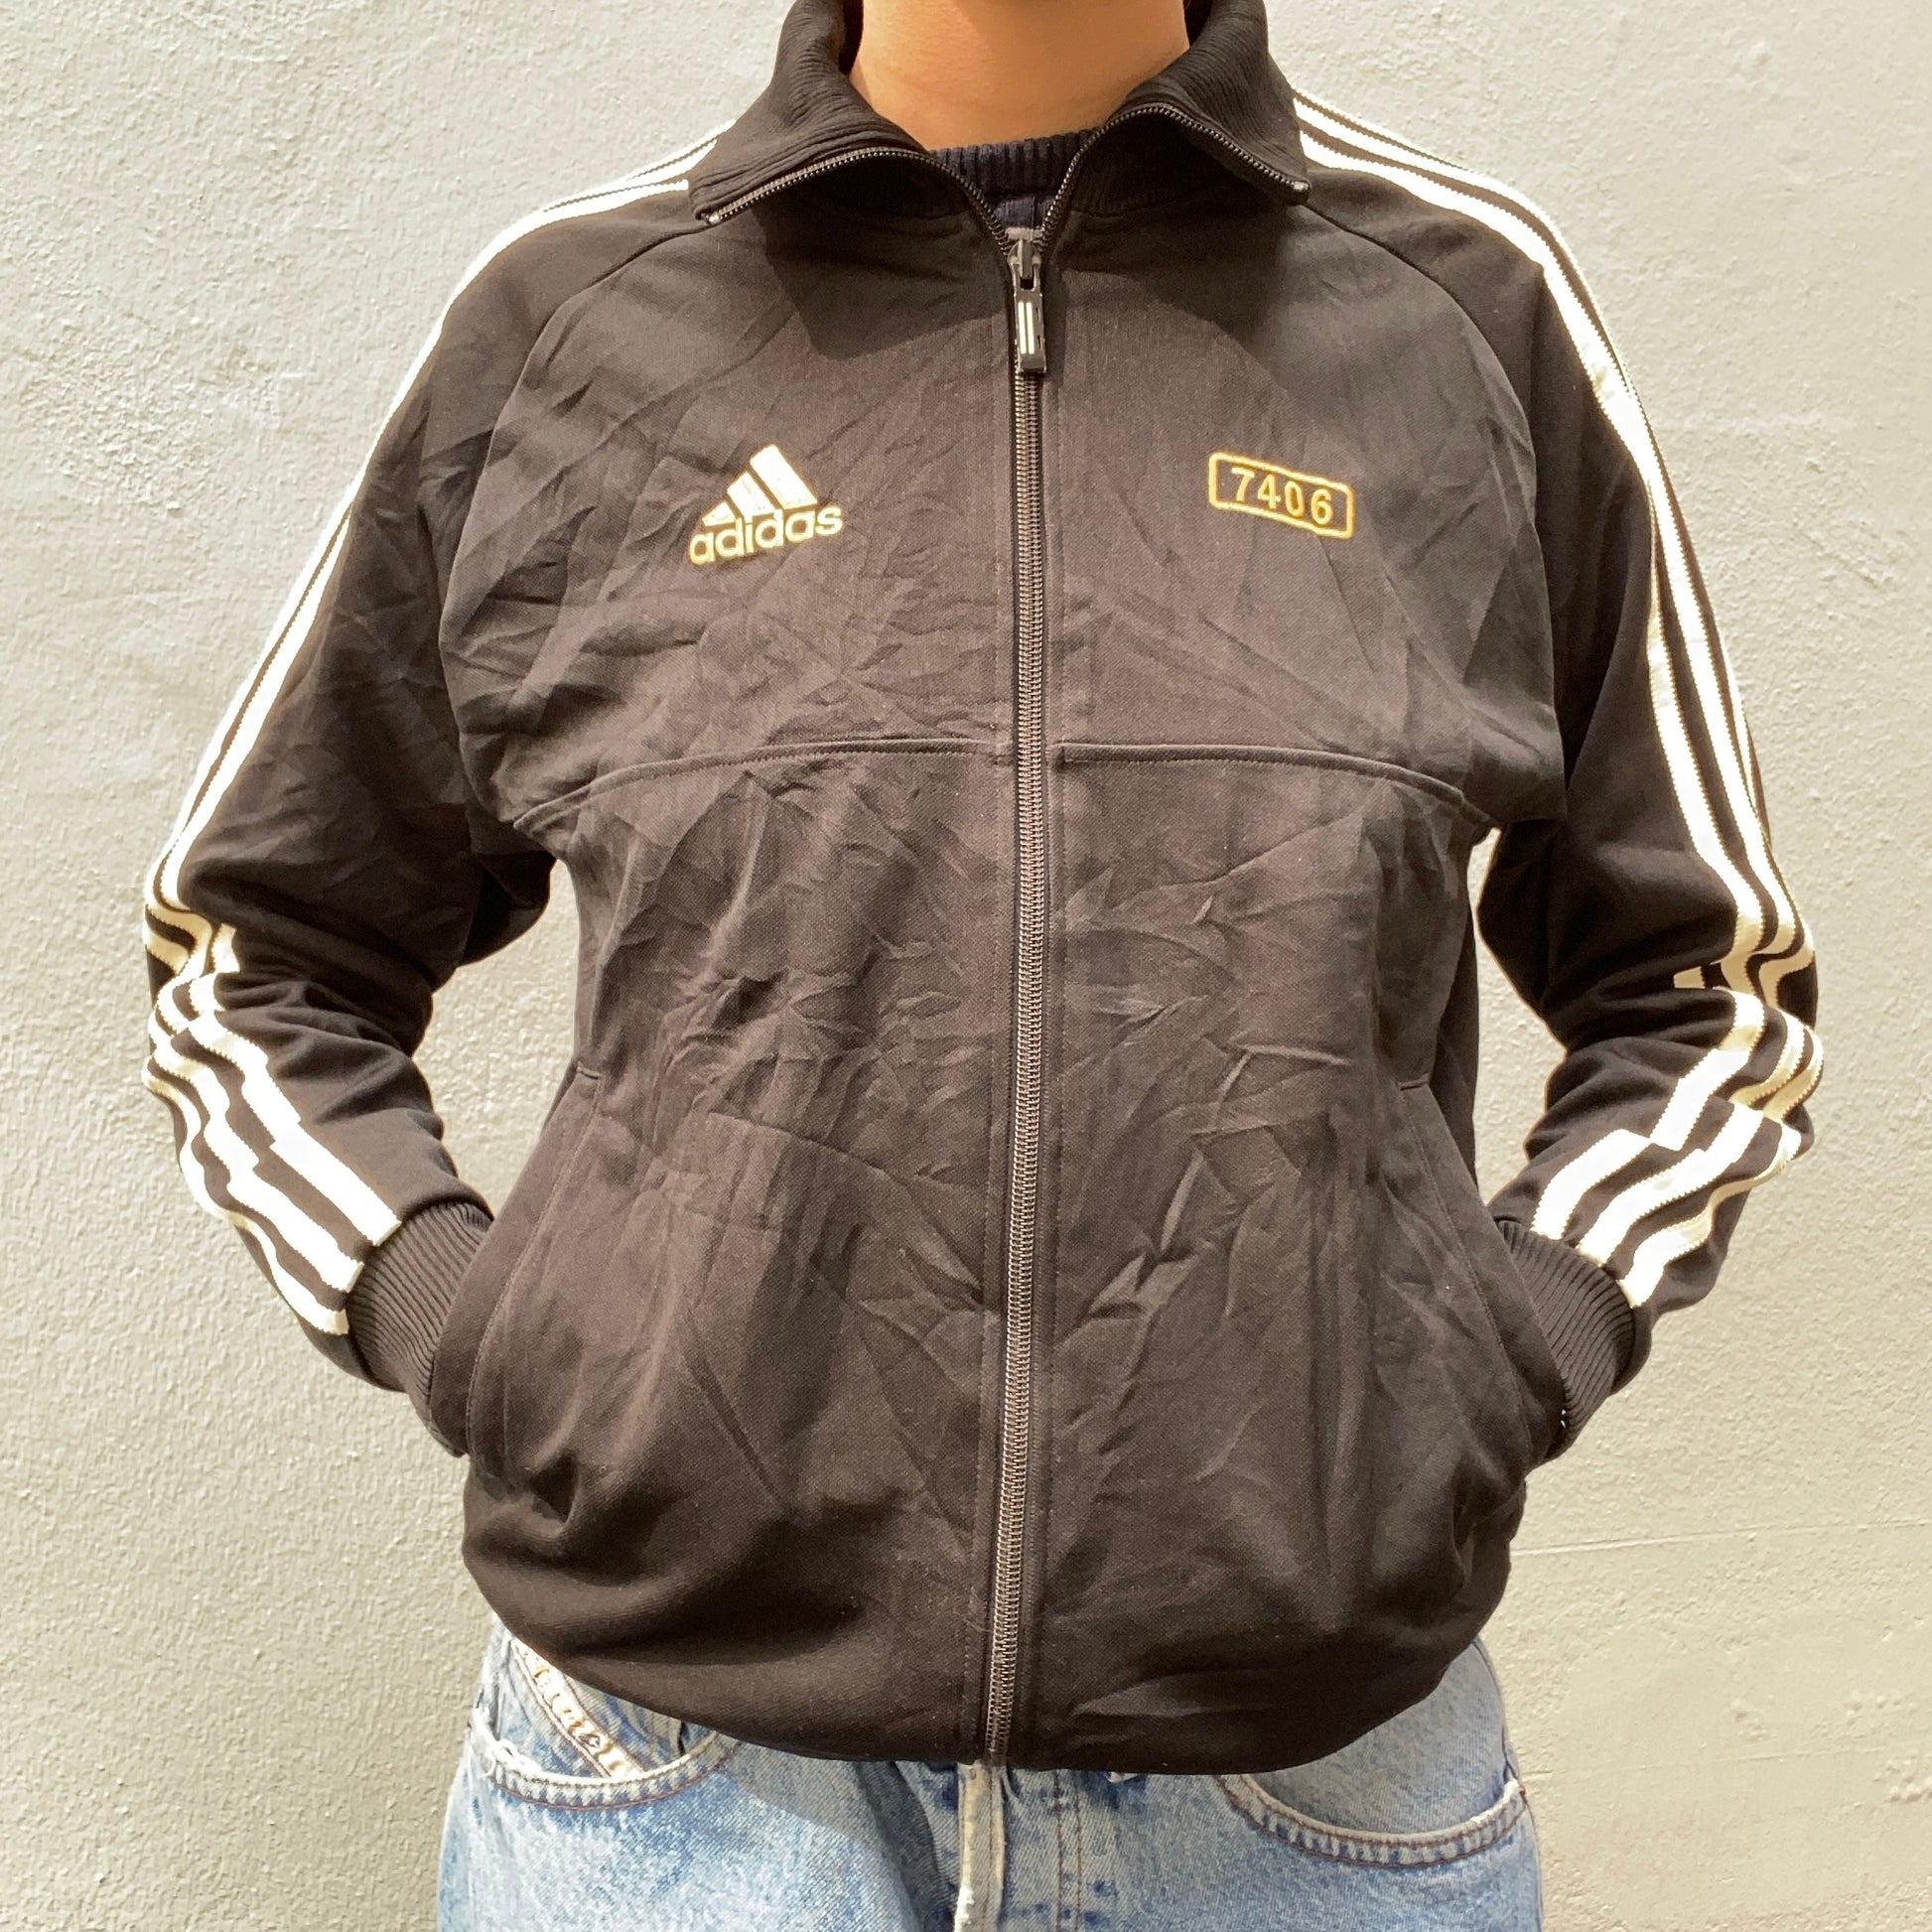 Adidas Black Track Suit front